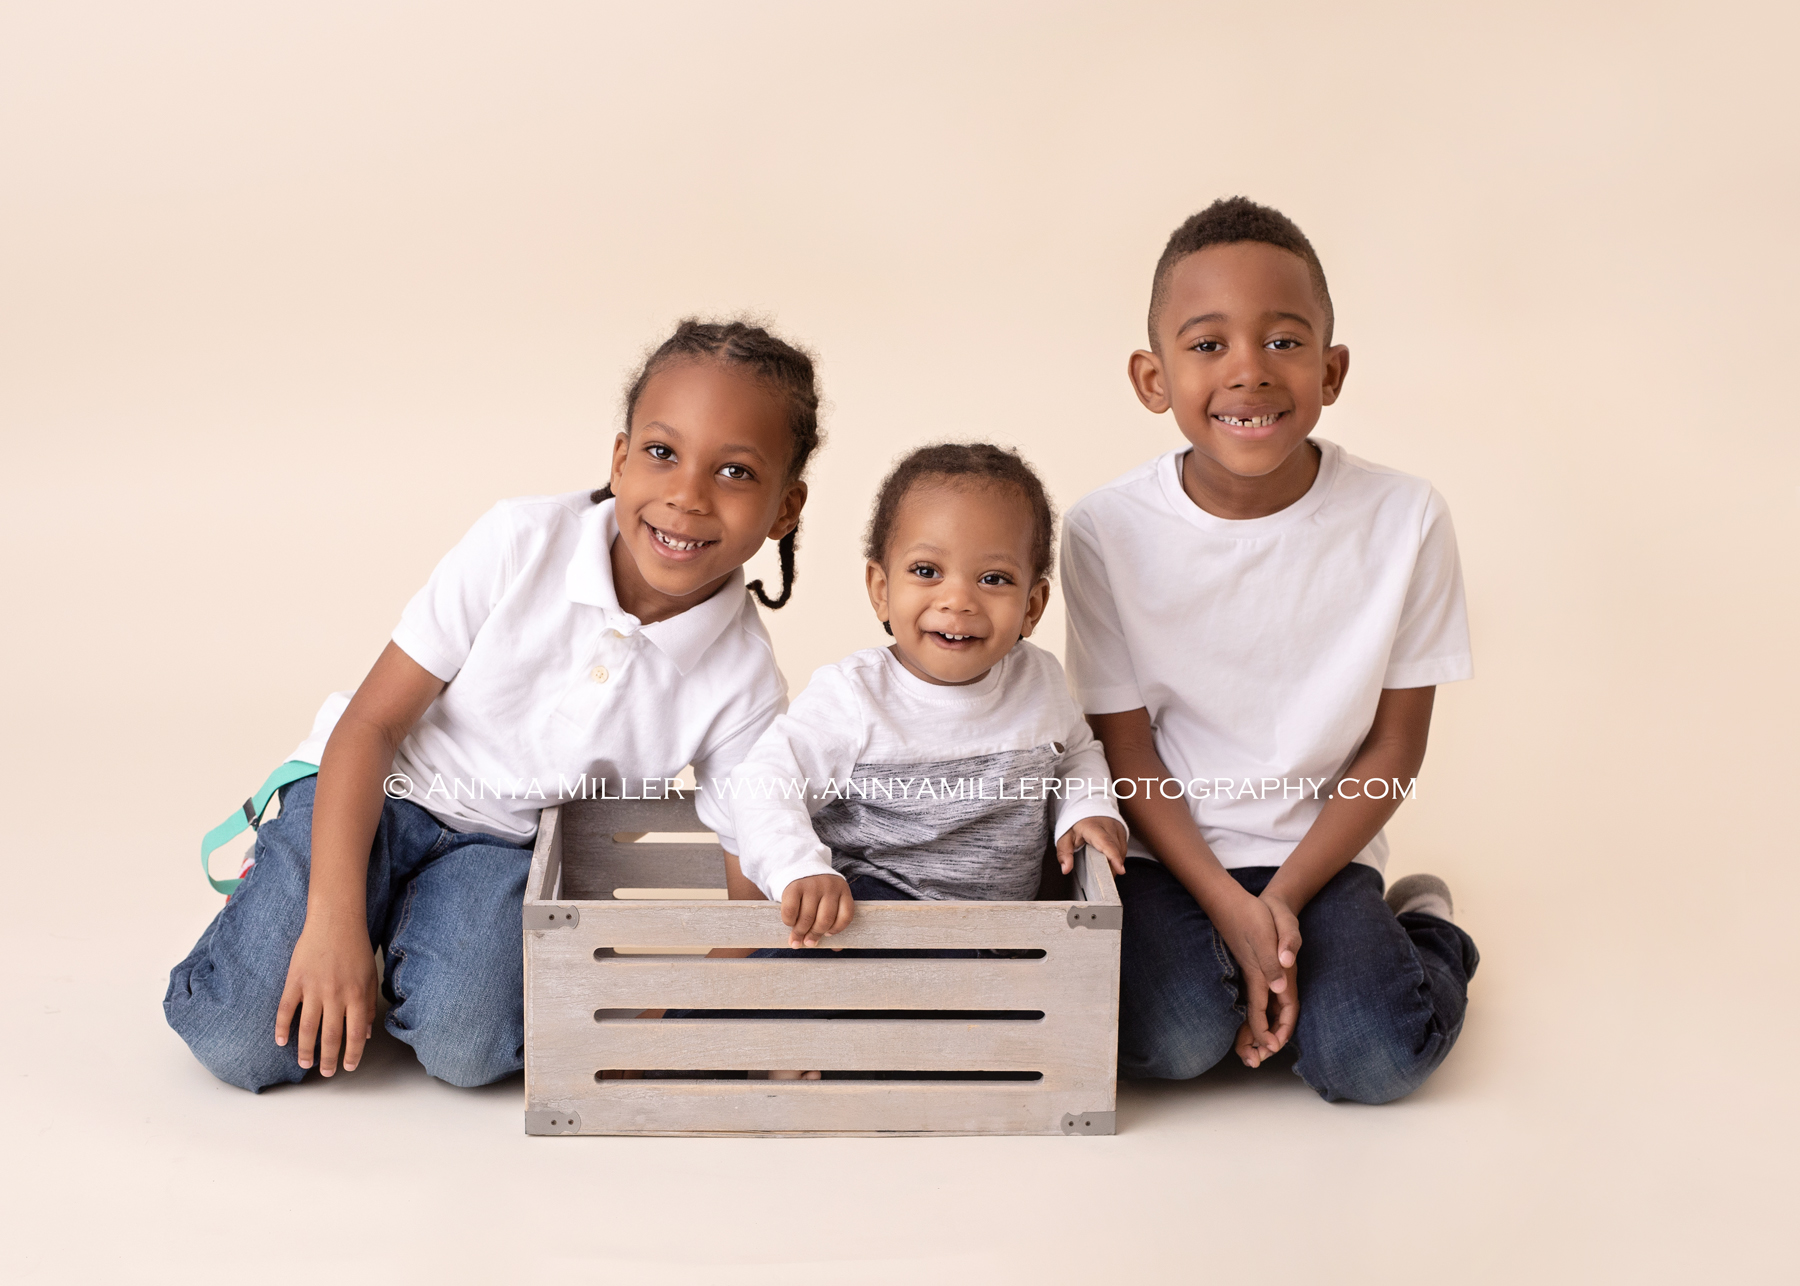 Durham Region family photographer Annya Miller creates beautiful portraits for families in Durham and the GTA